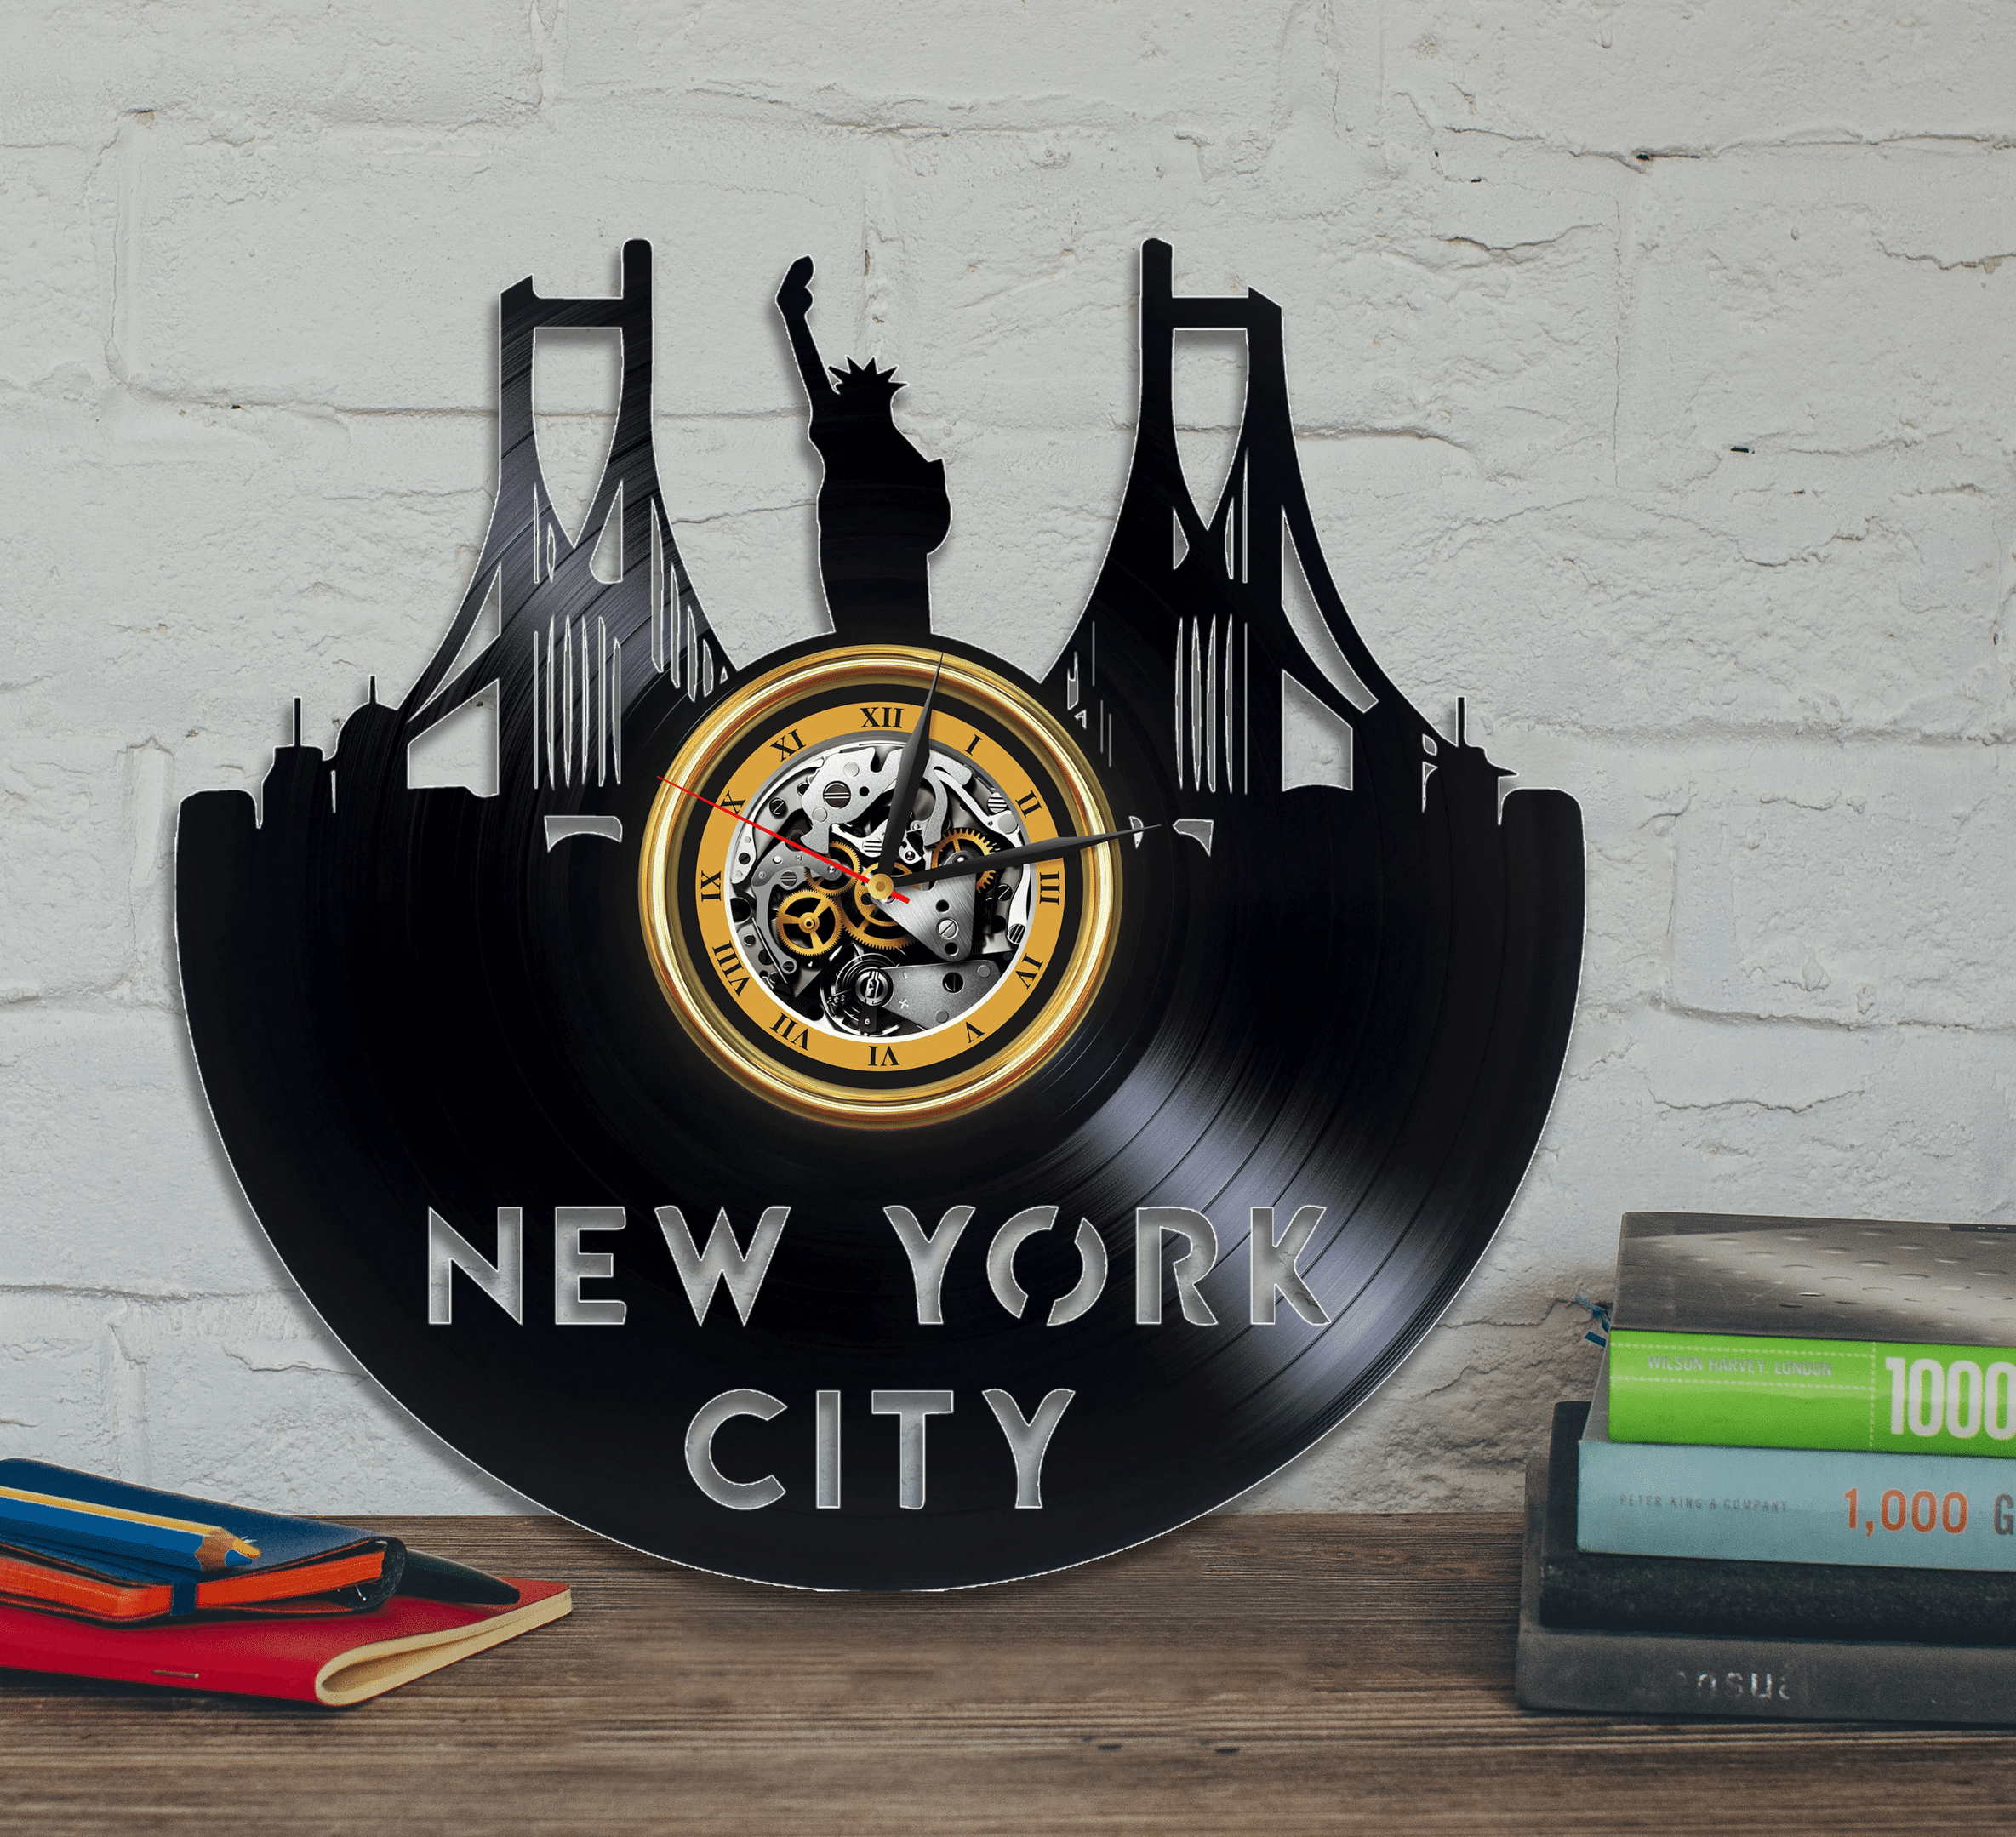 New York City Vinyl Record Unique Wall Clock Vintage Living Room Home D�cor Unusual Art Housewarming Gift For Family